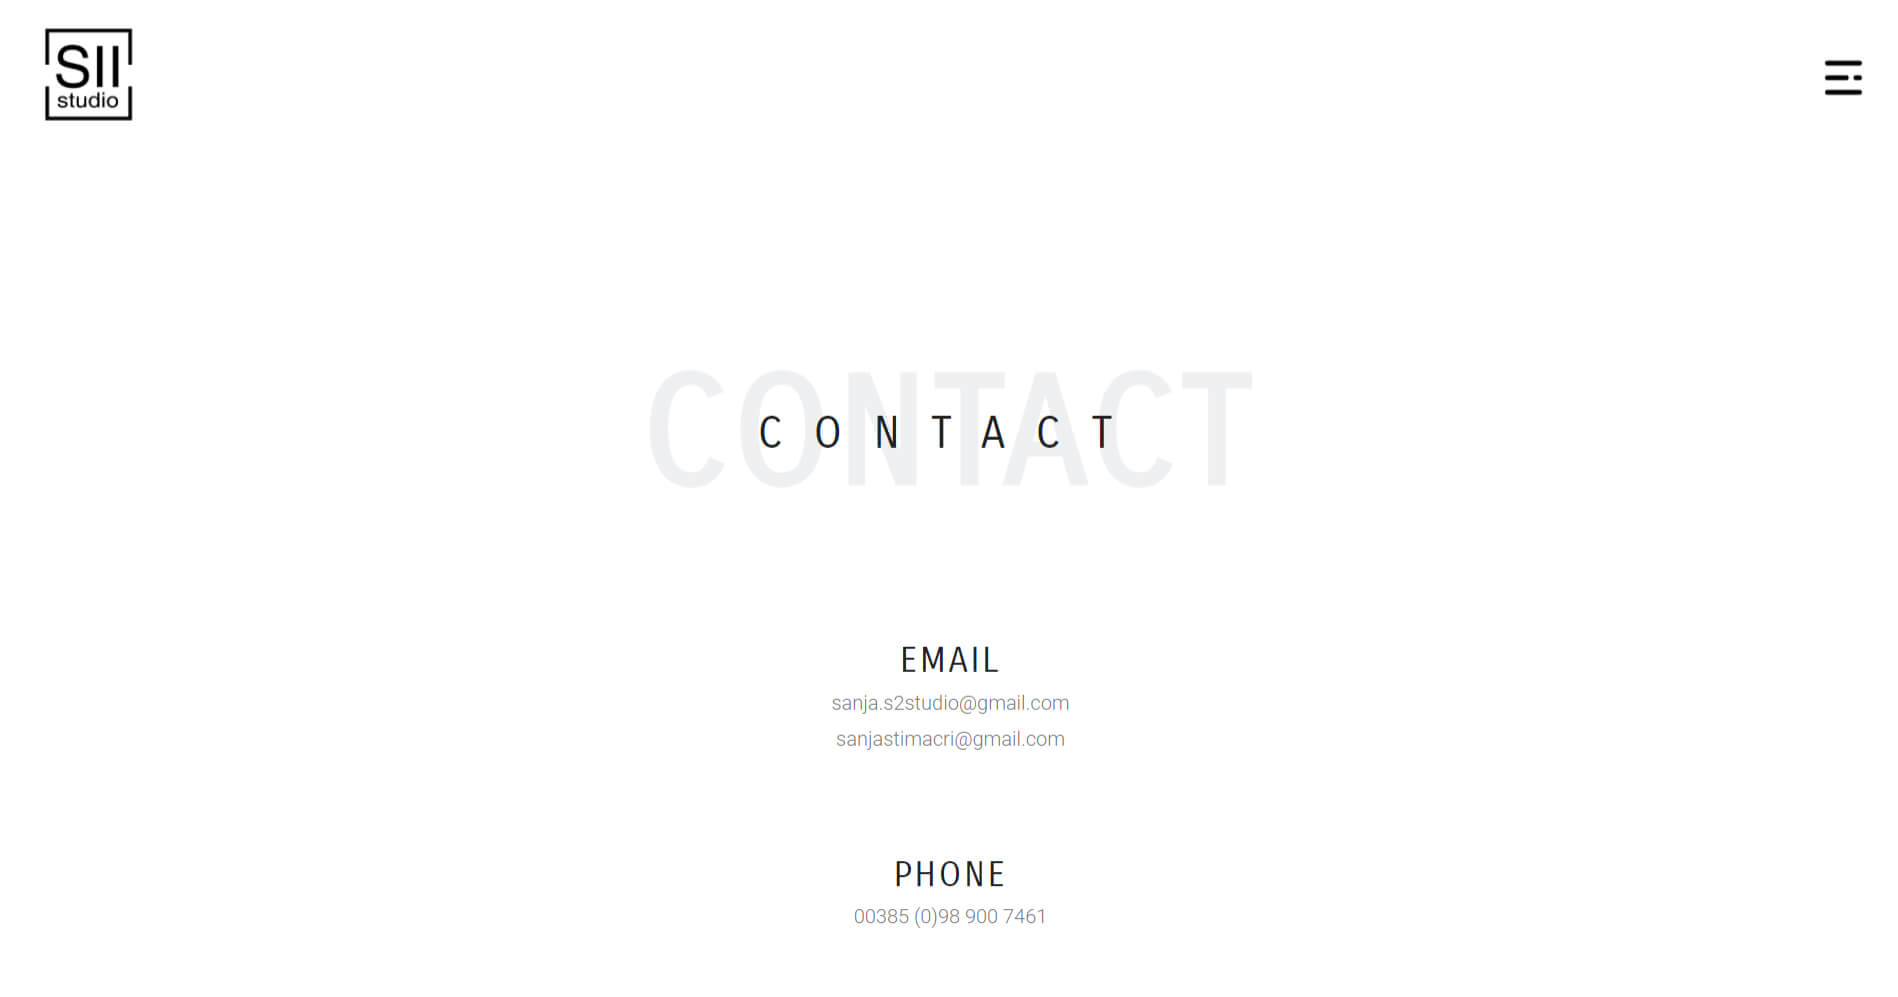 S2-Studio - Contact Page